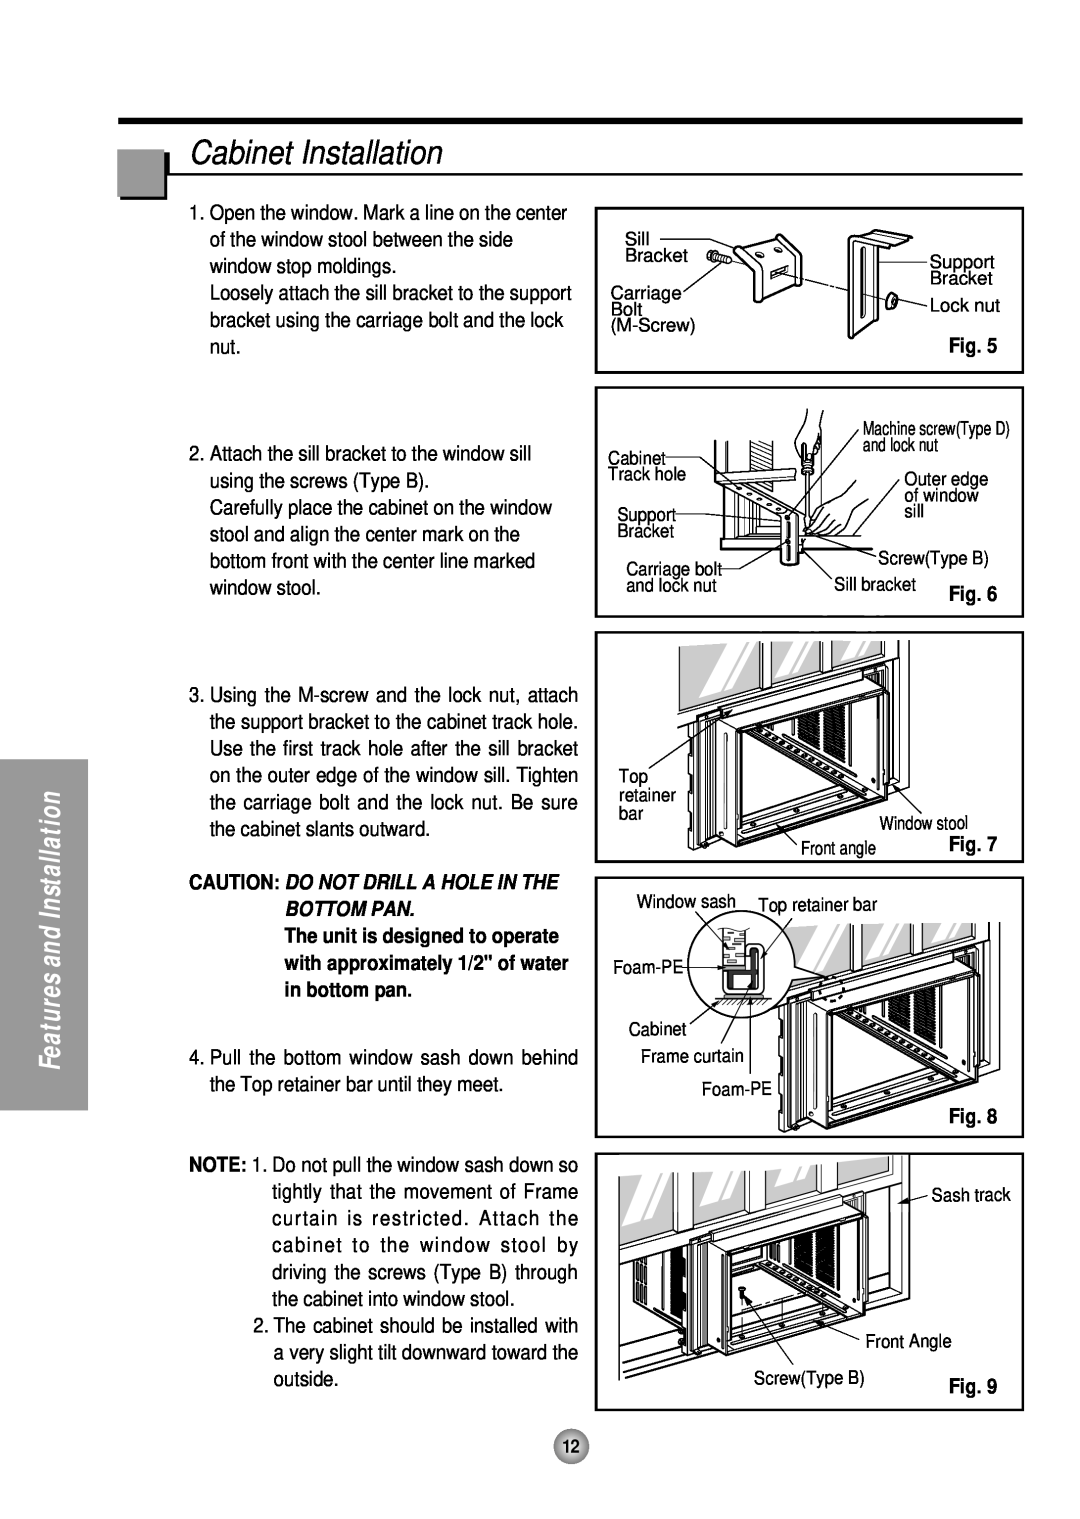 Panasonic HQ-2243TH manual Cabinet Installation, Caution Do Not Drill A Hole In The Bottom Pan, Features and Installation 